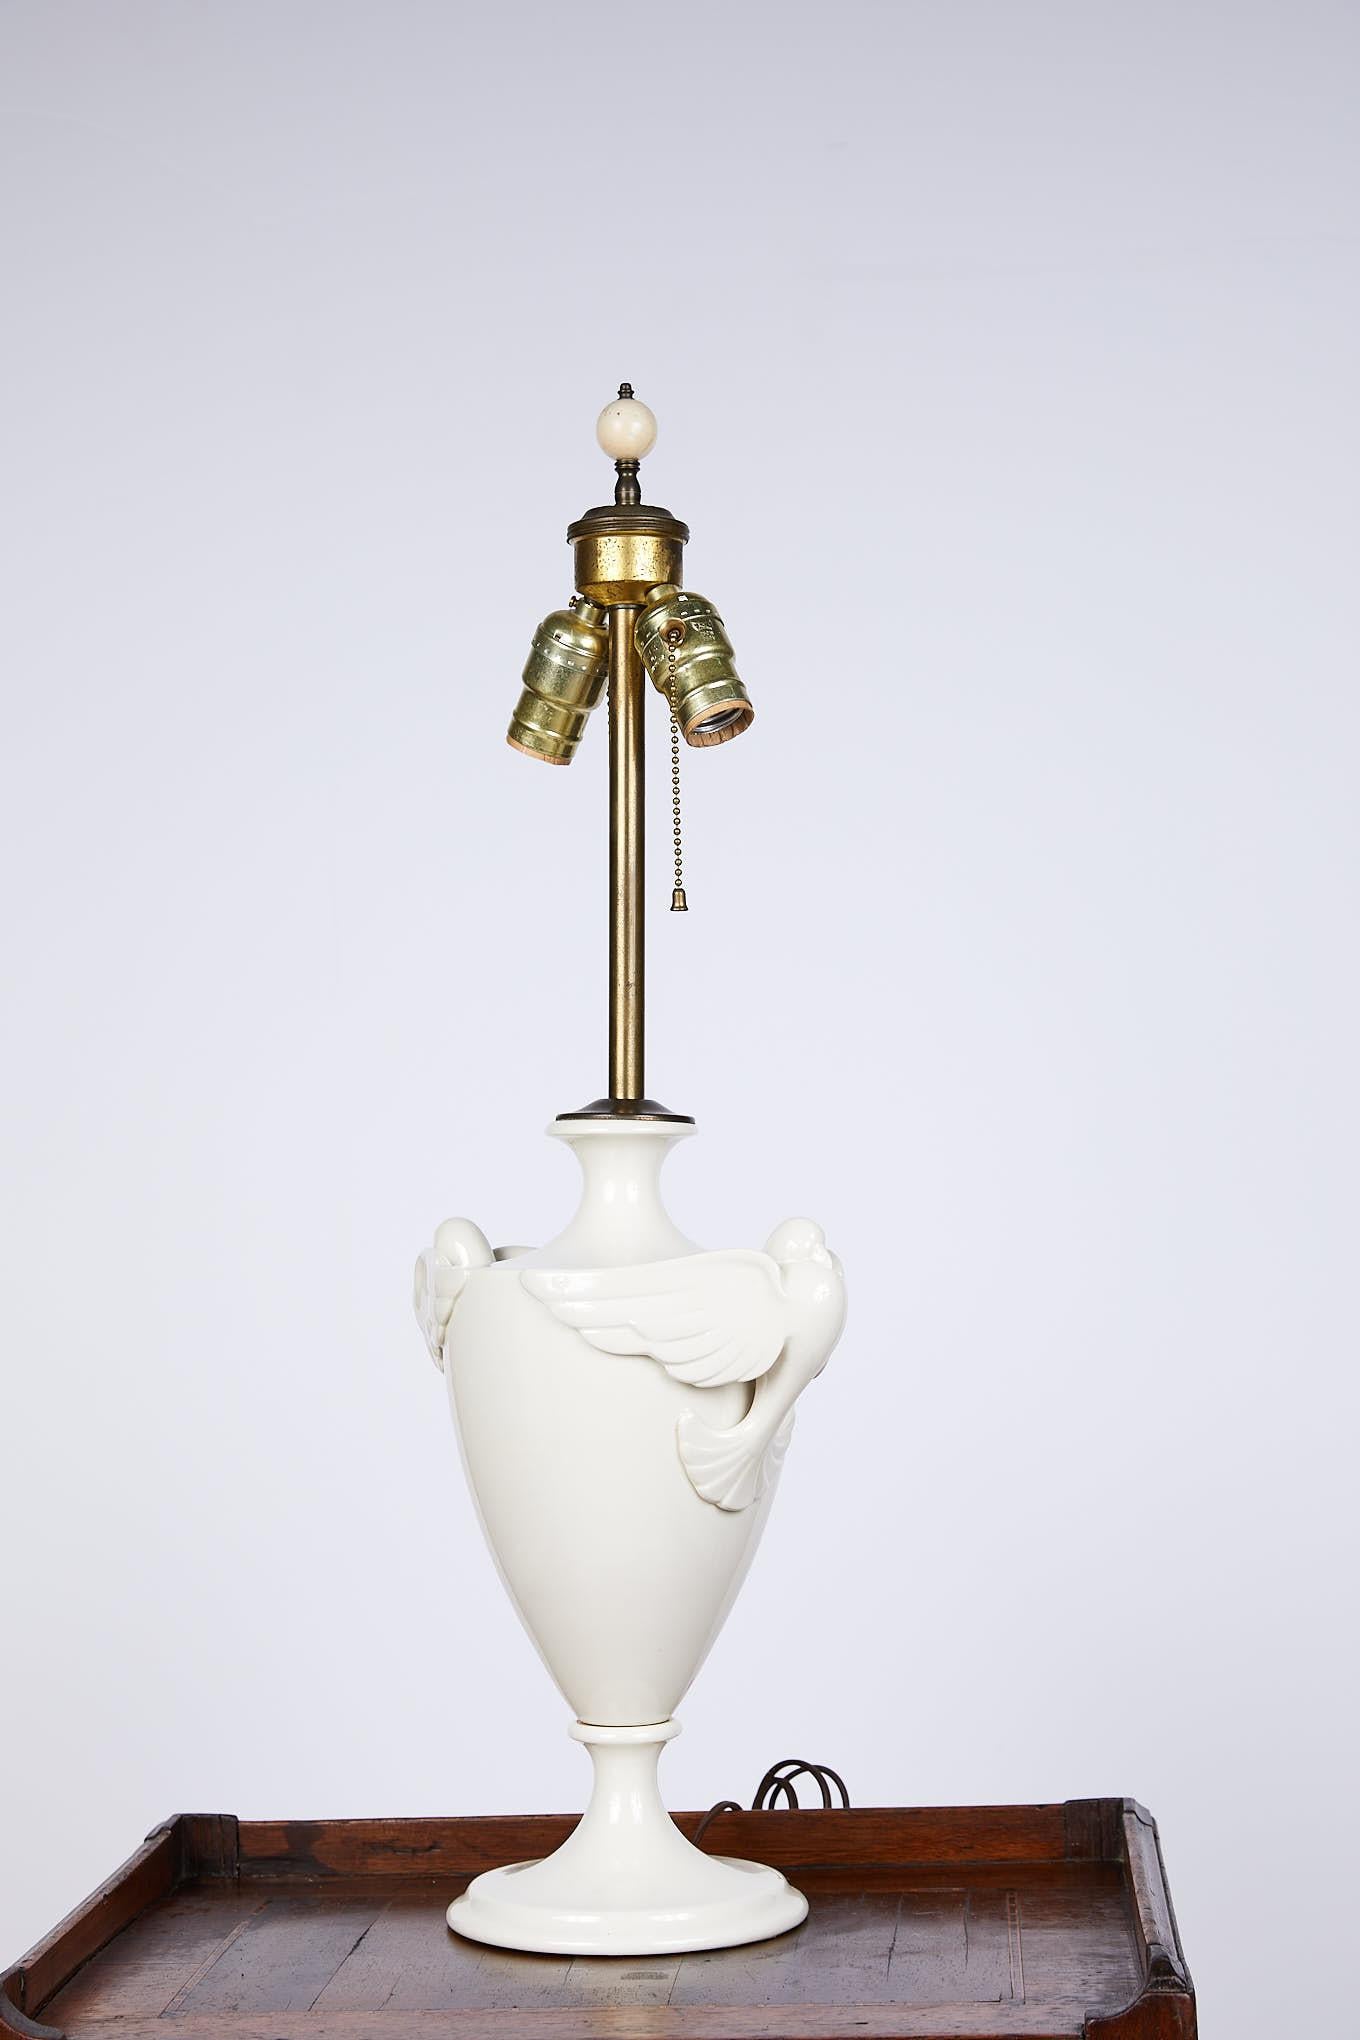 20th century table lamp in the Art Deco style made of white porcelain in a traditional urn shape with stylized doves mounted as handles on either side. 
 